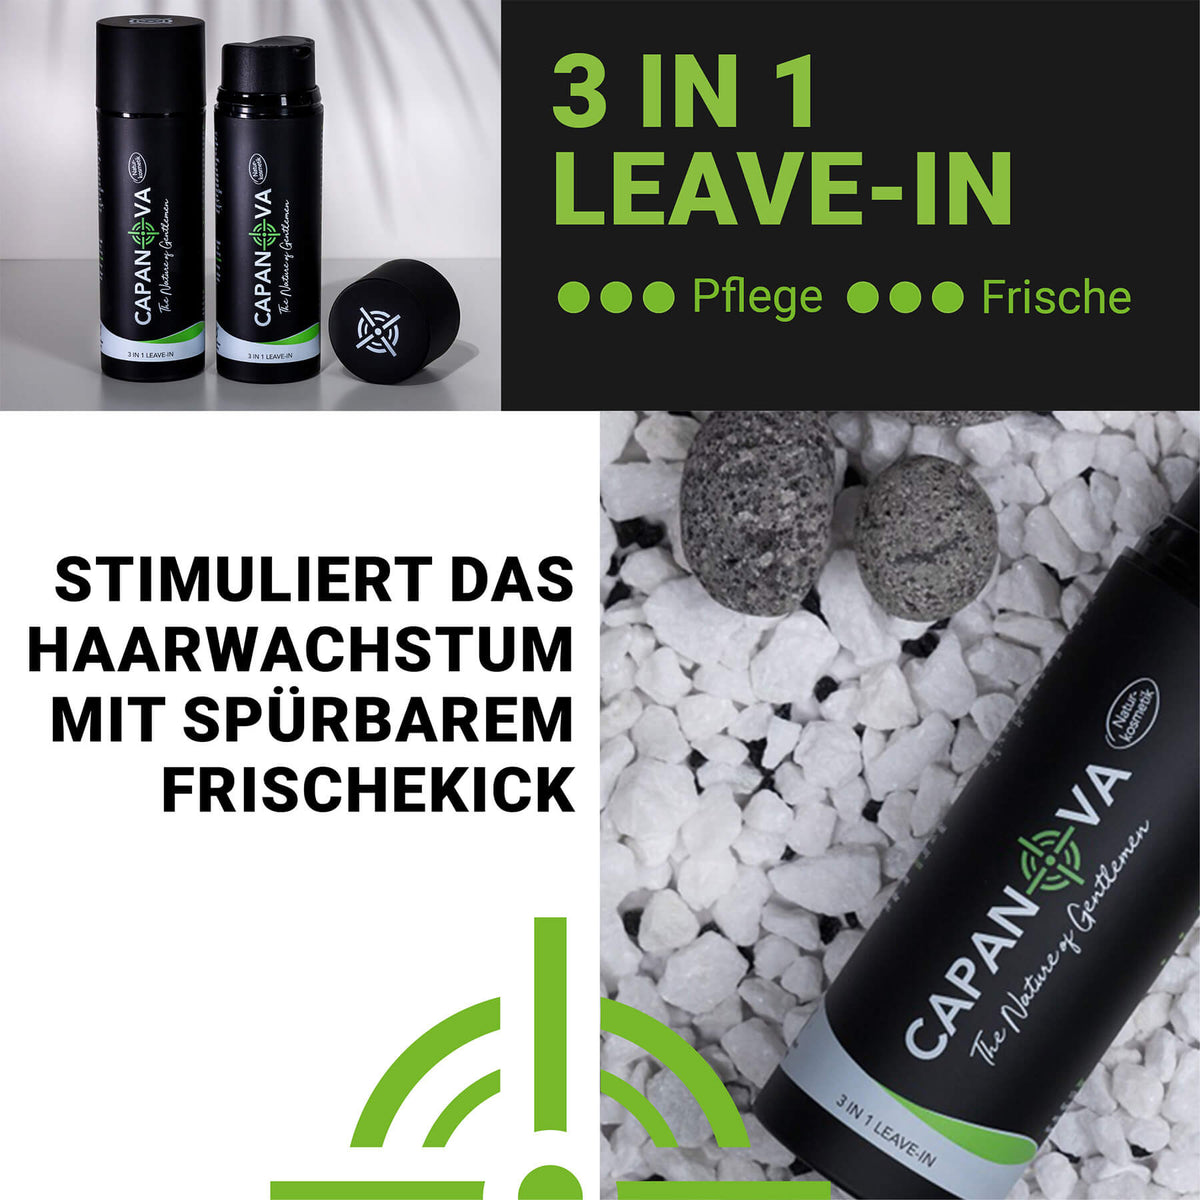 3 IN 1 Leave-In Hairbooster